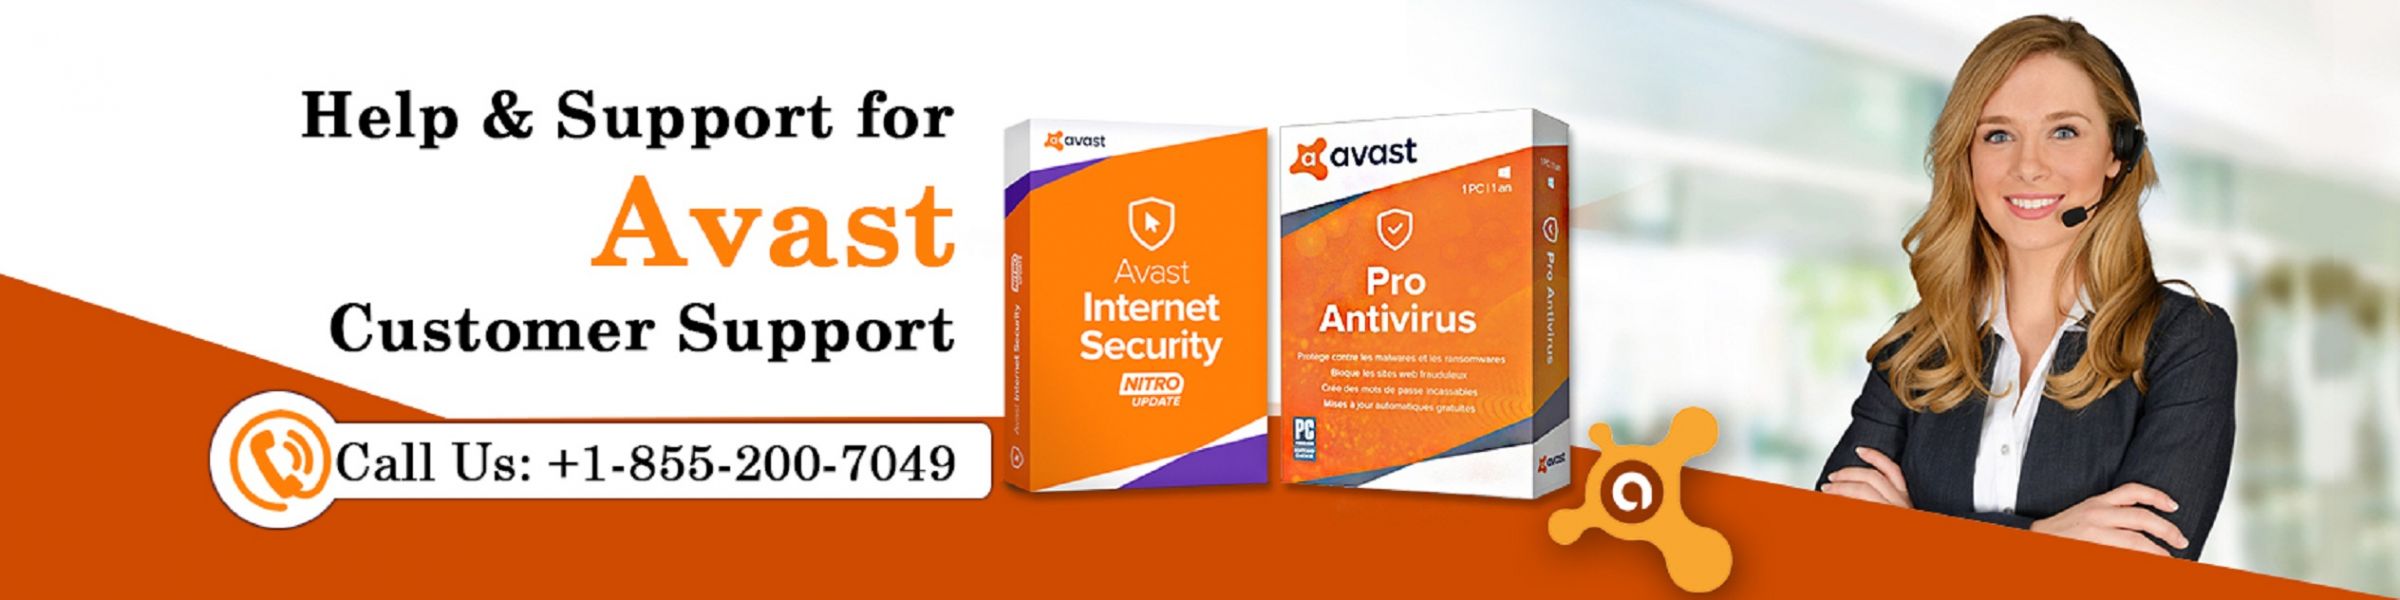 Avast Technical Support Phone Number